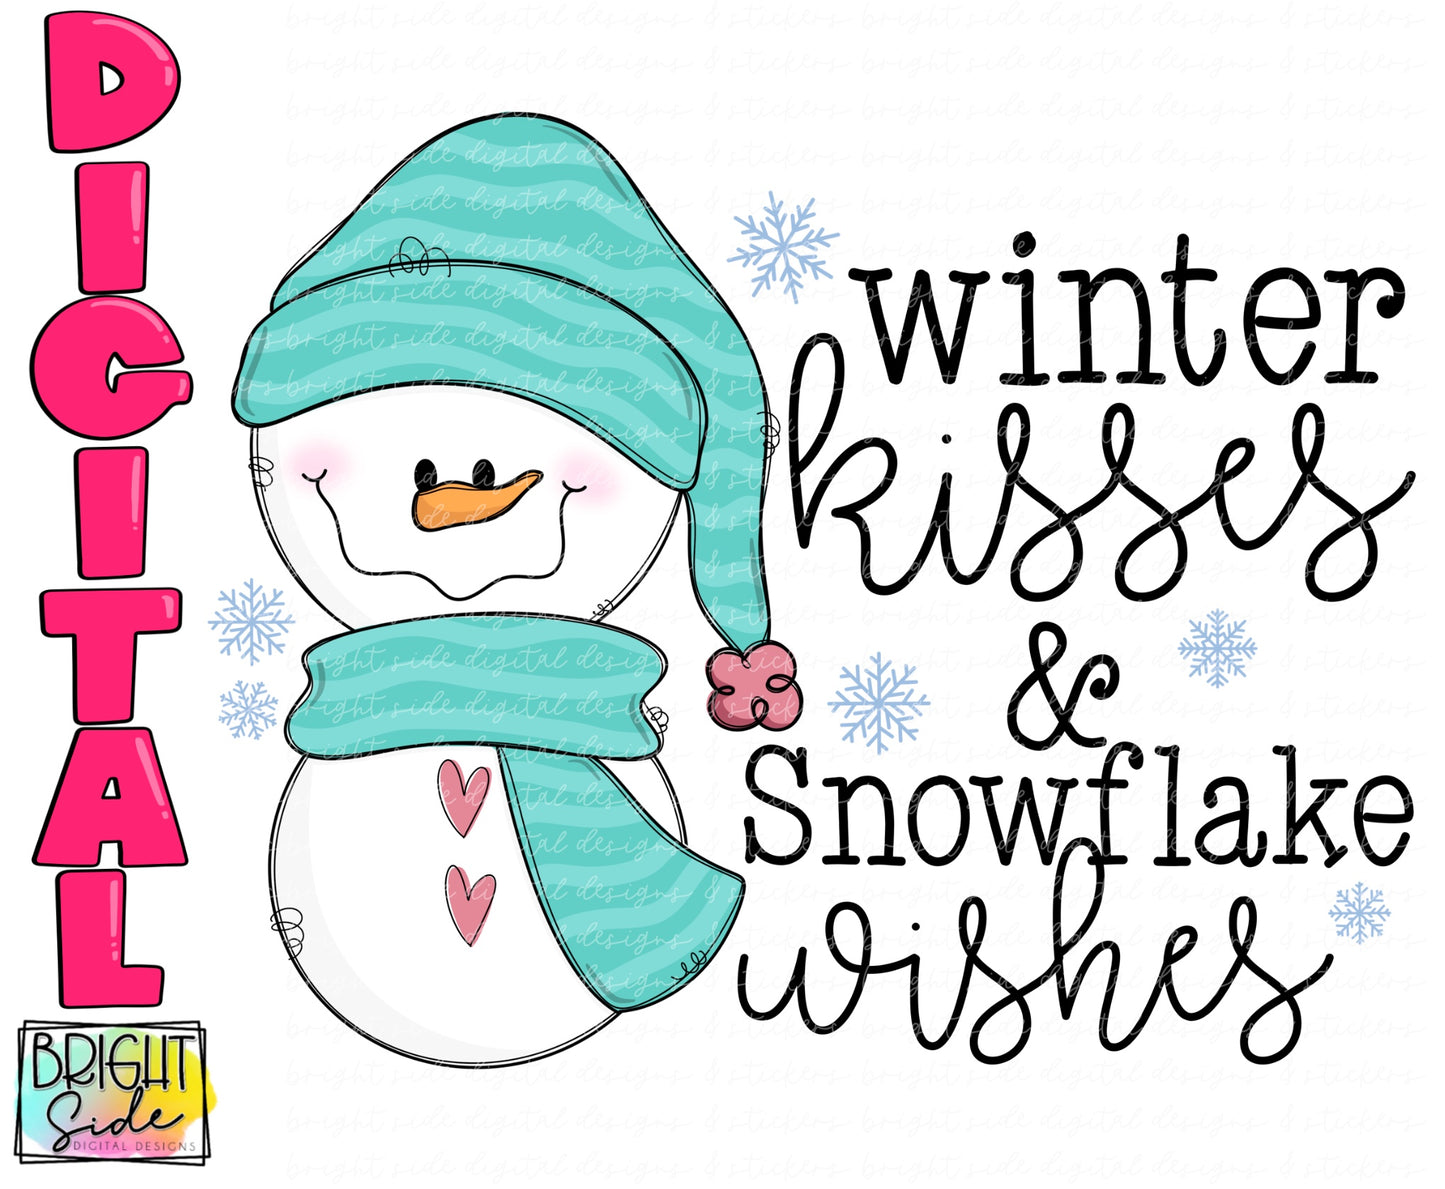 Winter kisses & snowflake wishes